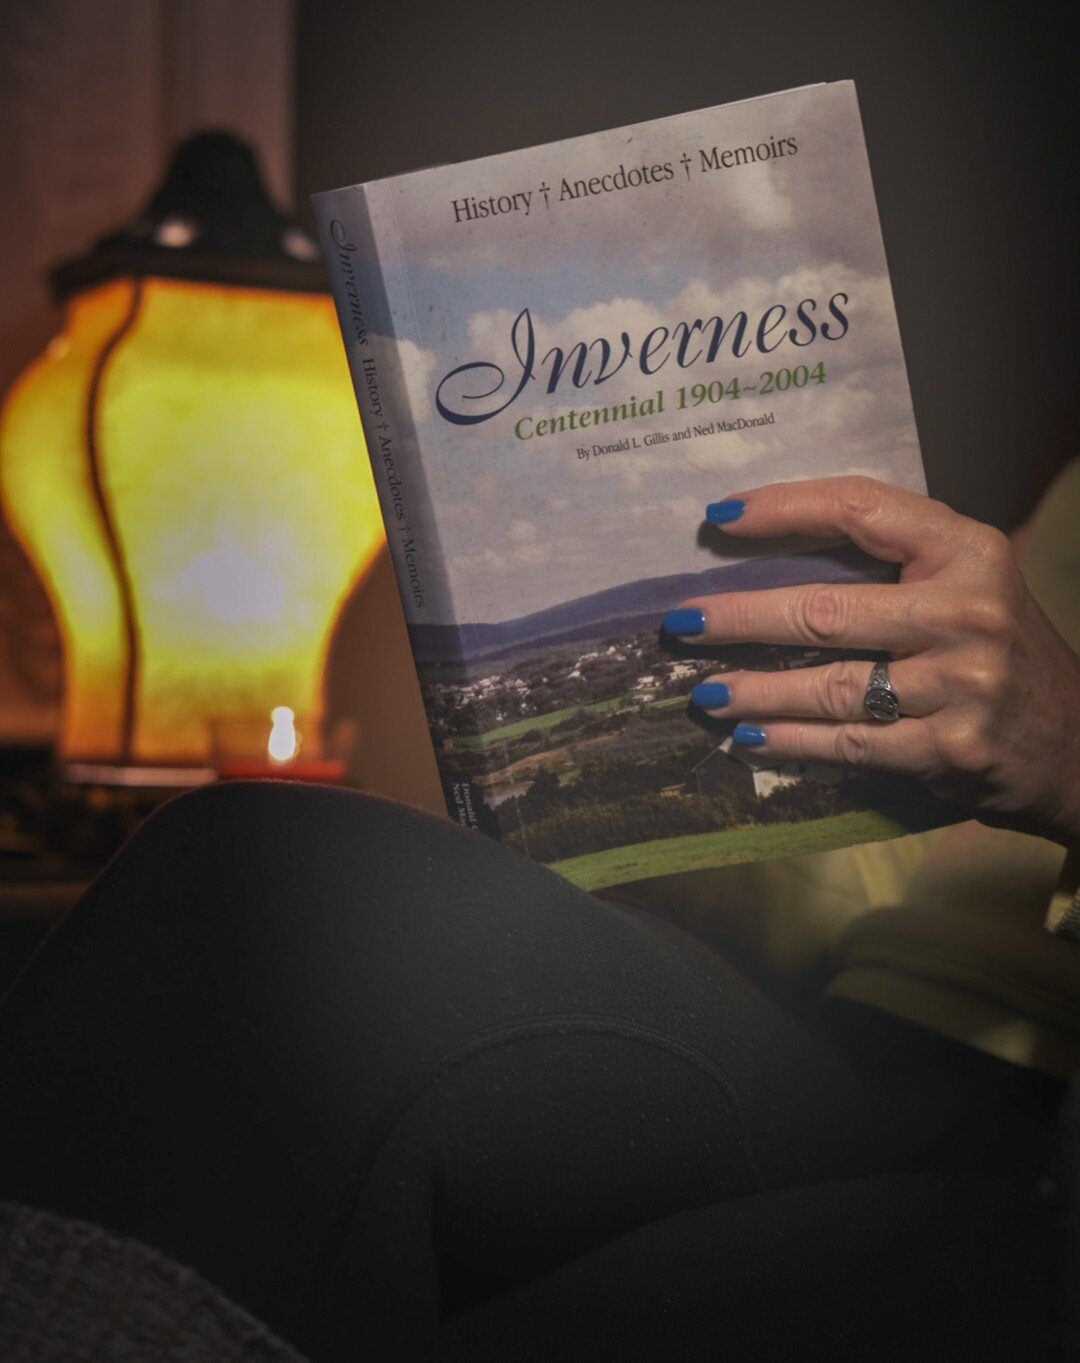 Today is #NationalBookLoversDay 📖📚
Read up on our storied history with the following books...

📕 Inverness Centennial (1904 &ndash; 2004) 

Authors: Donald L. Gillis and Ned MacDonald

&quot;Taking a trip down memory lane is not easy. Sometimes it